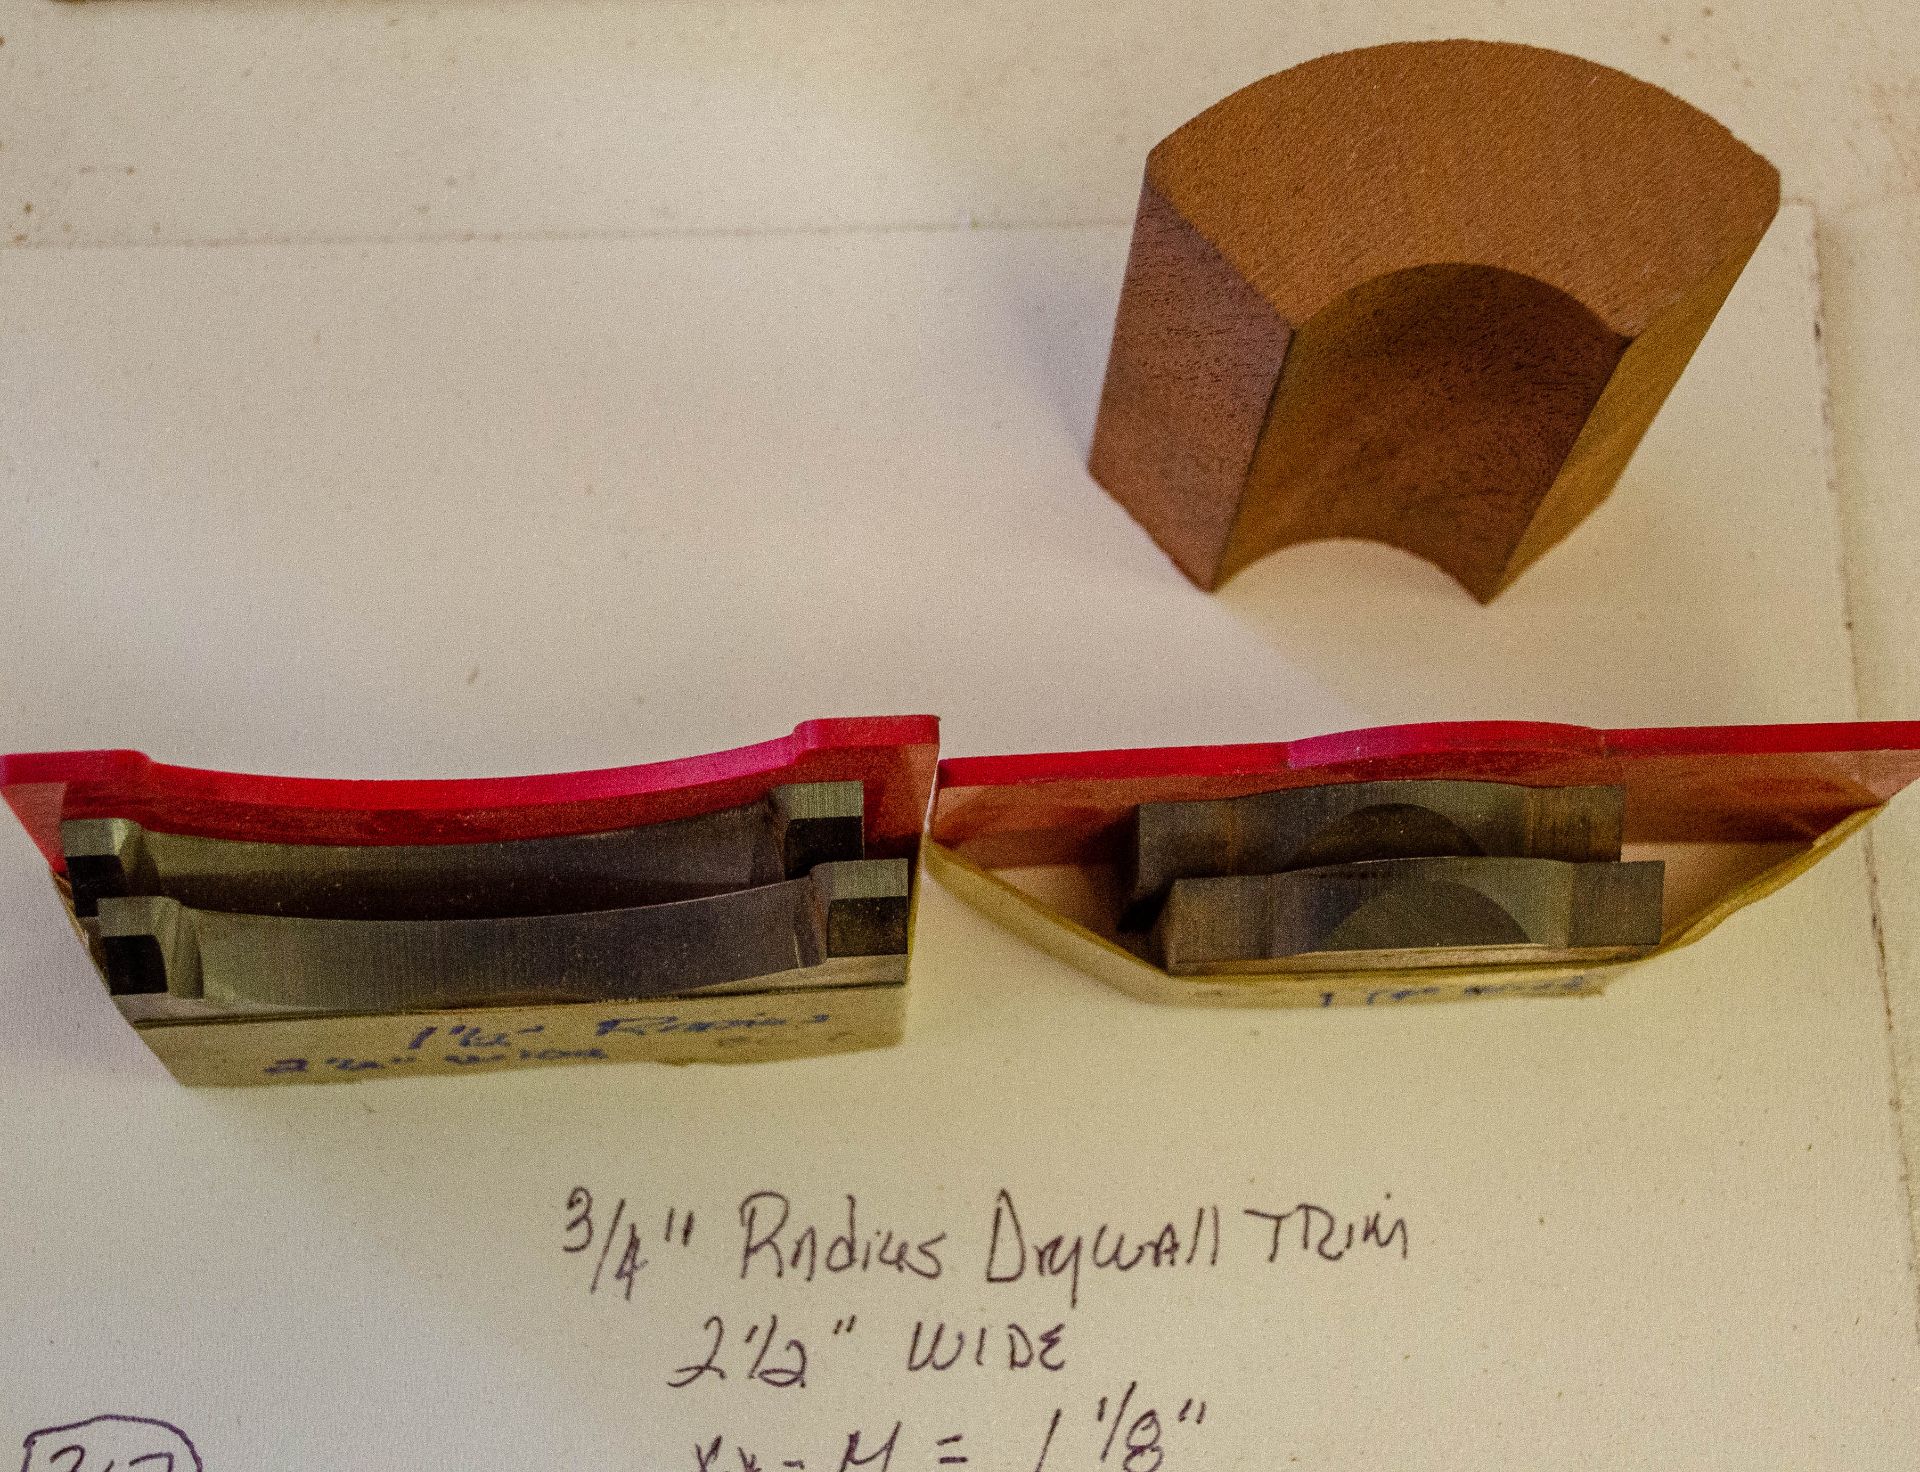 Moulding Knives, 3" - 5-1/4" Base/Case, 0 - 15 - N = 1/2", Dull, Knives are in Good Condition an - Image 2 of 2